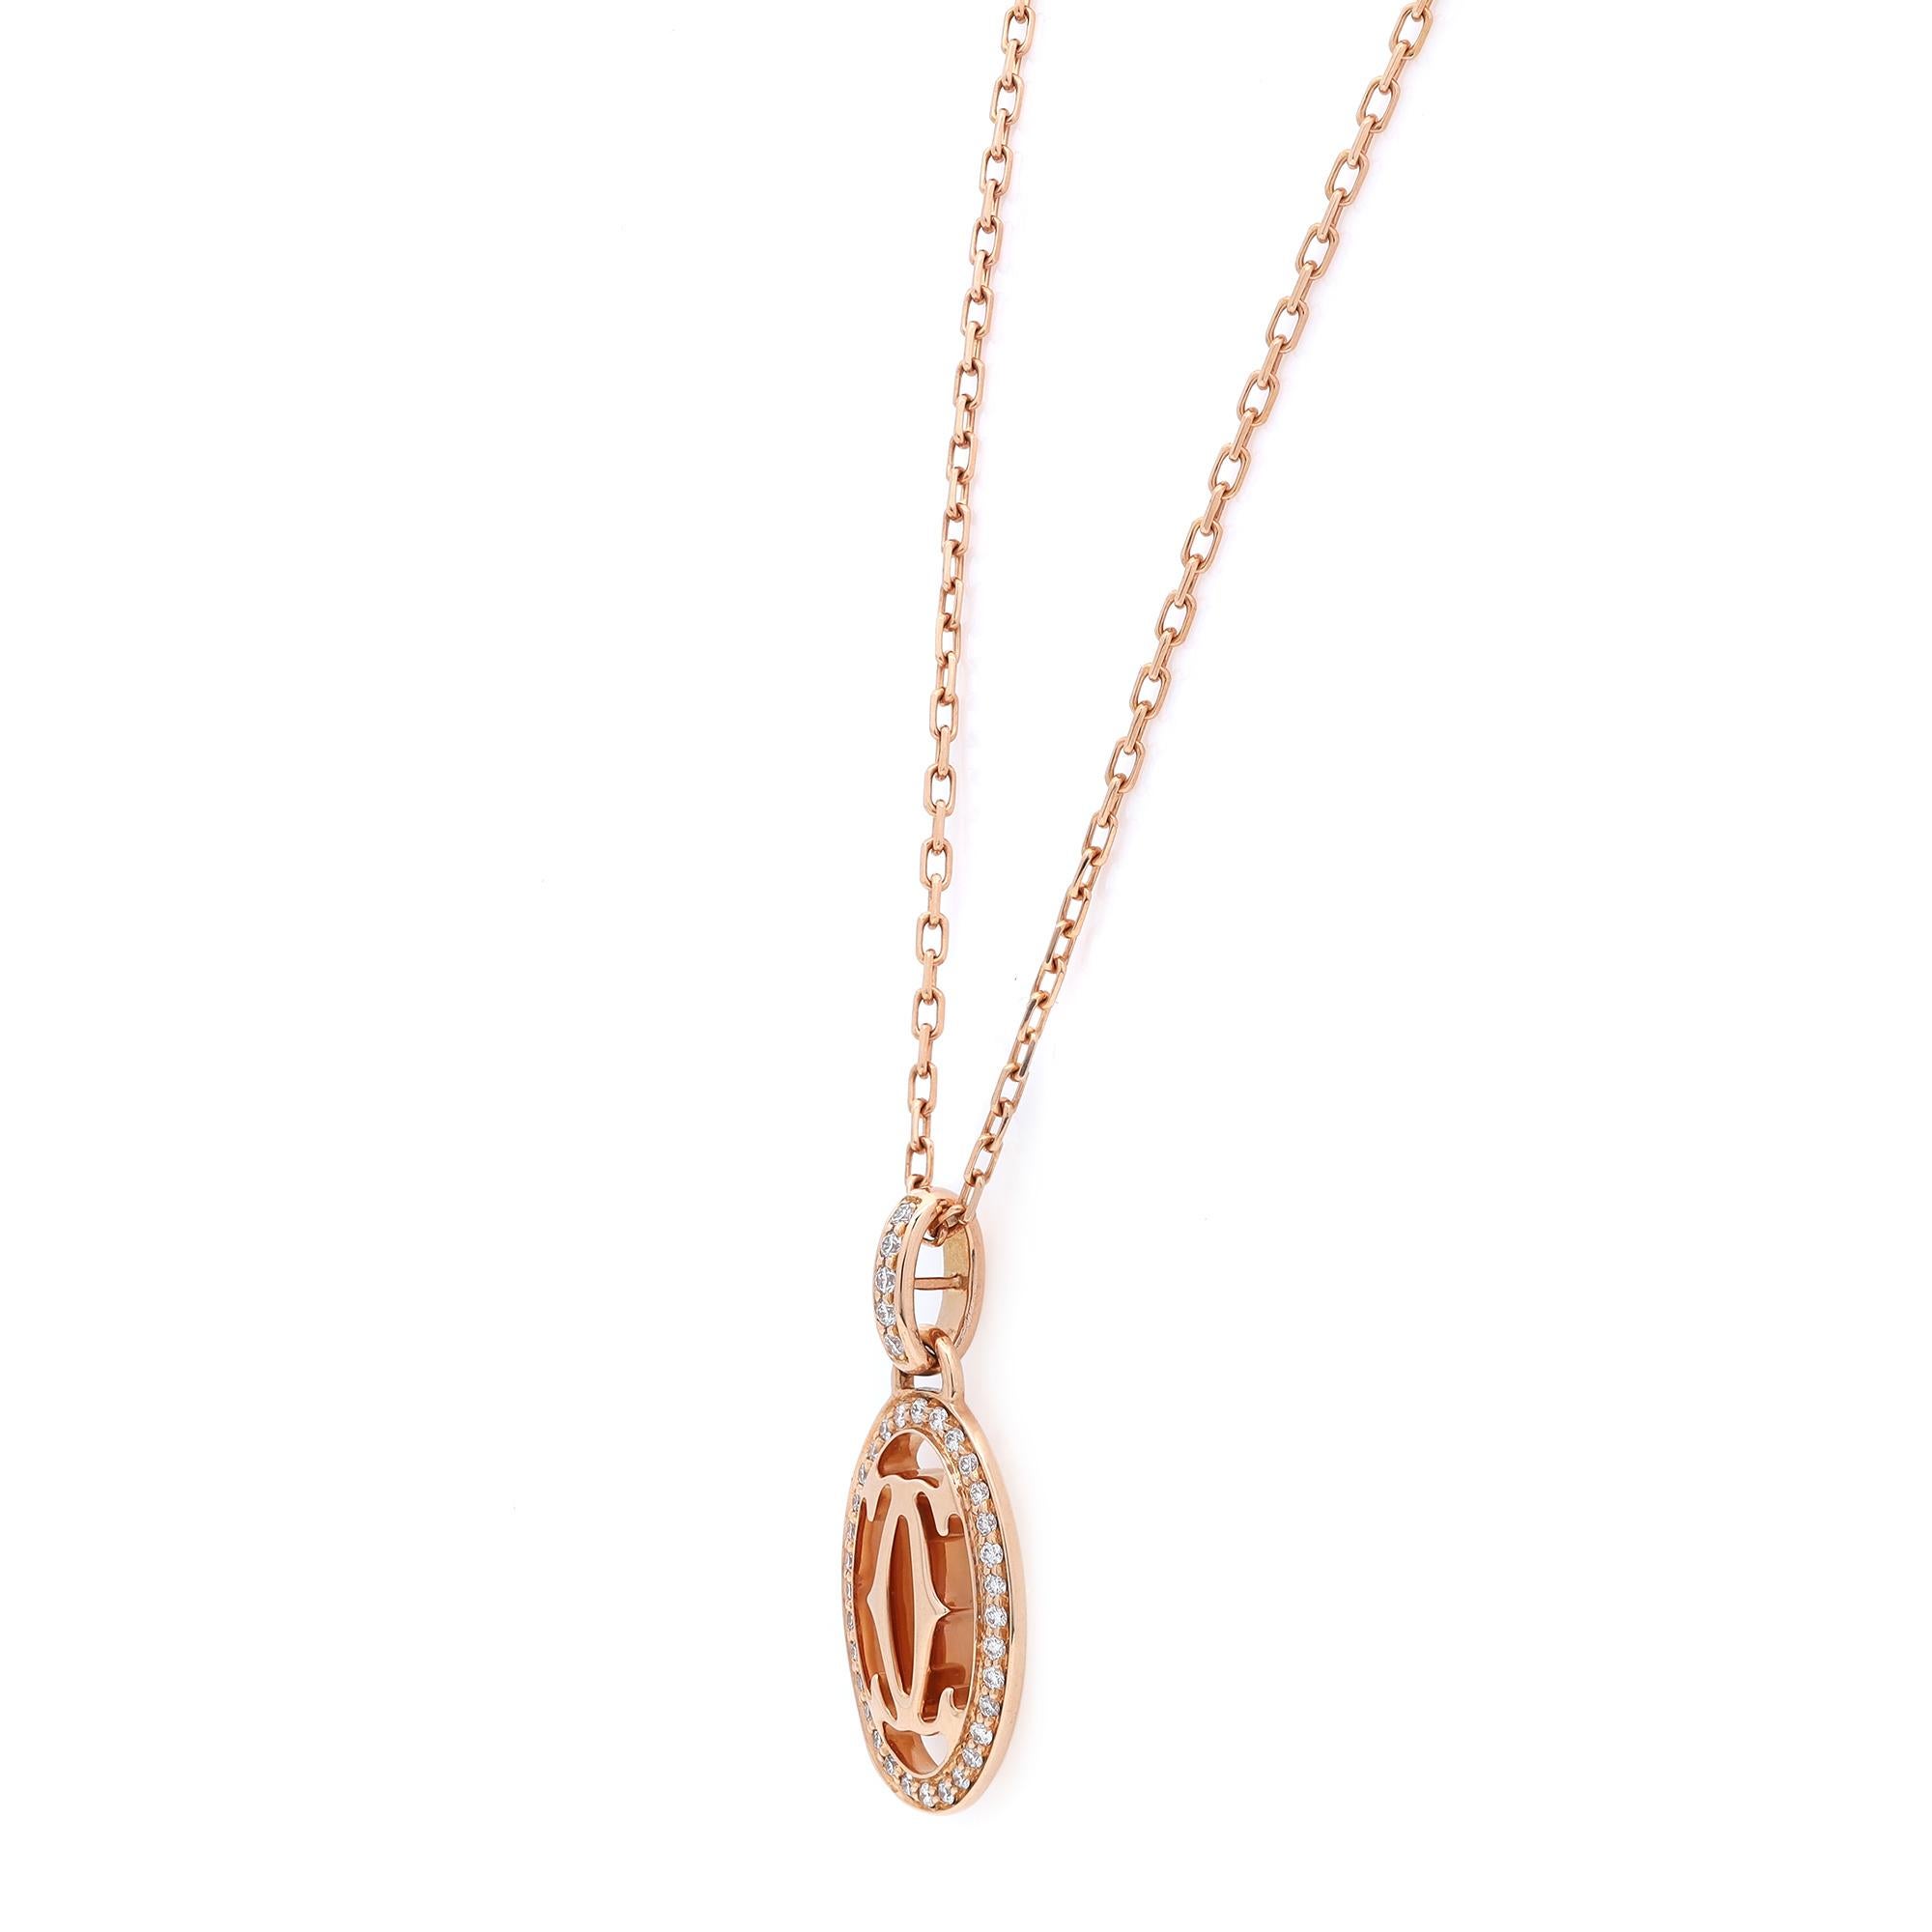 This stunning Double C de Cartier diamond logo pendant necklace is crafted in fine 18k rose gold. It features 37 pave set round brilliant cut diamonds weighing 0.10 carat in total. Chain length: 16.5 inches. Total weight: 4.40 grams. Excellent